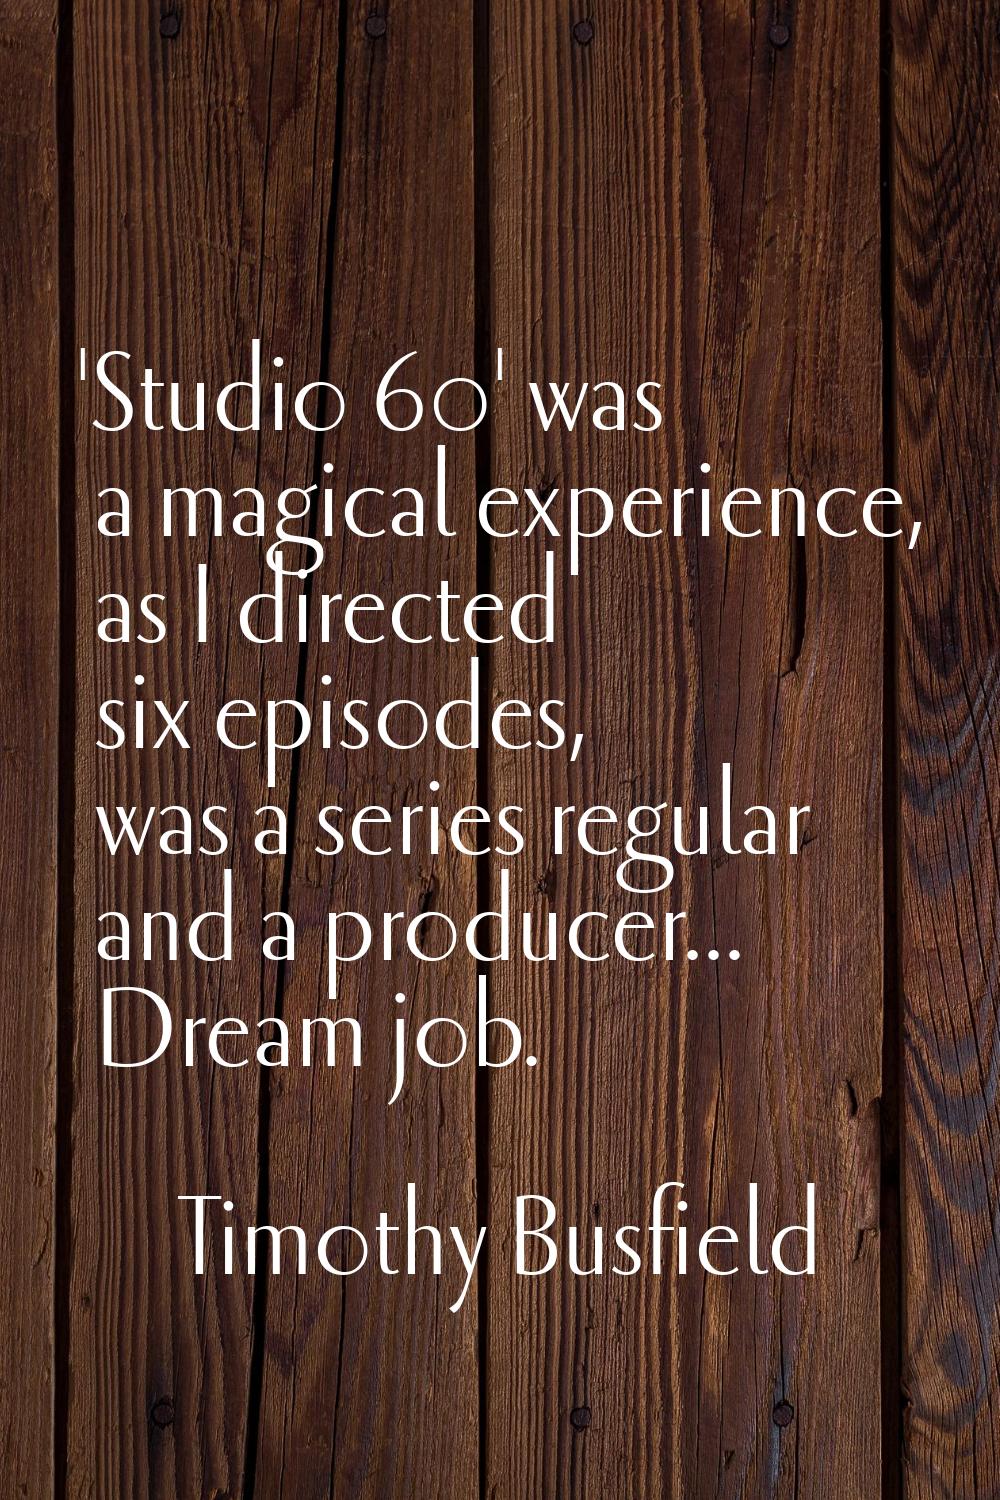 'Studio 60' was a magical experience, as I directed six episodes, was a series regular and a produc